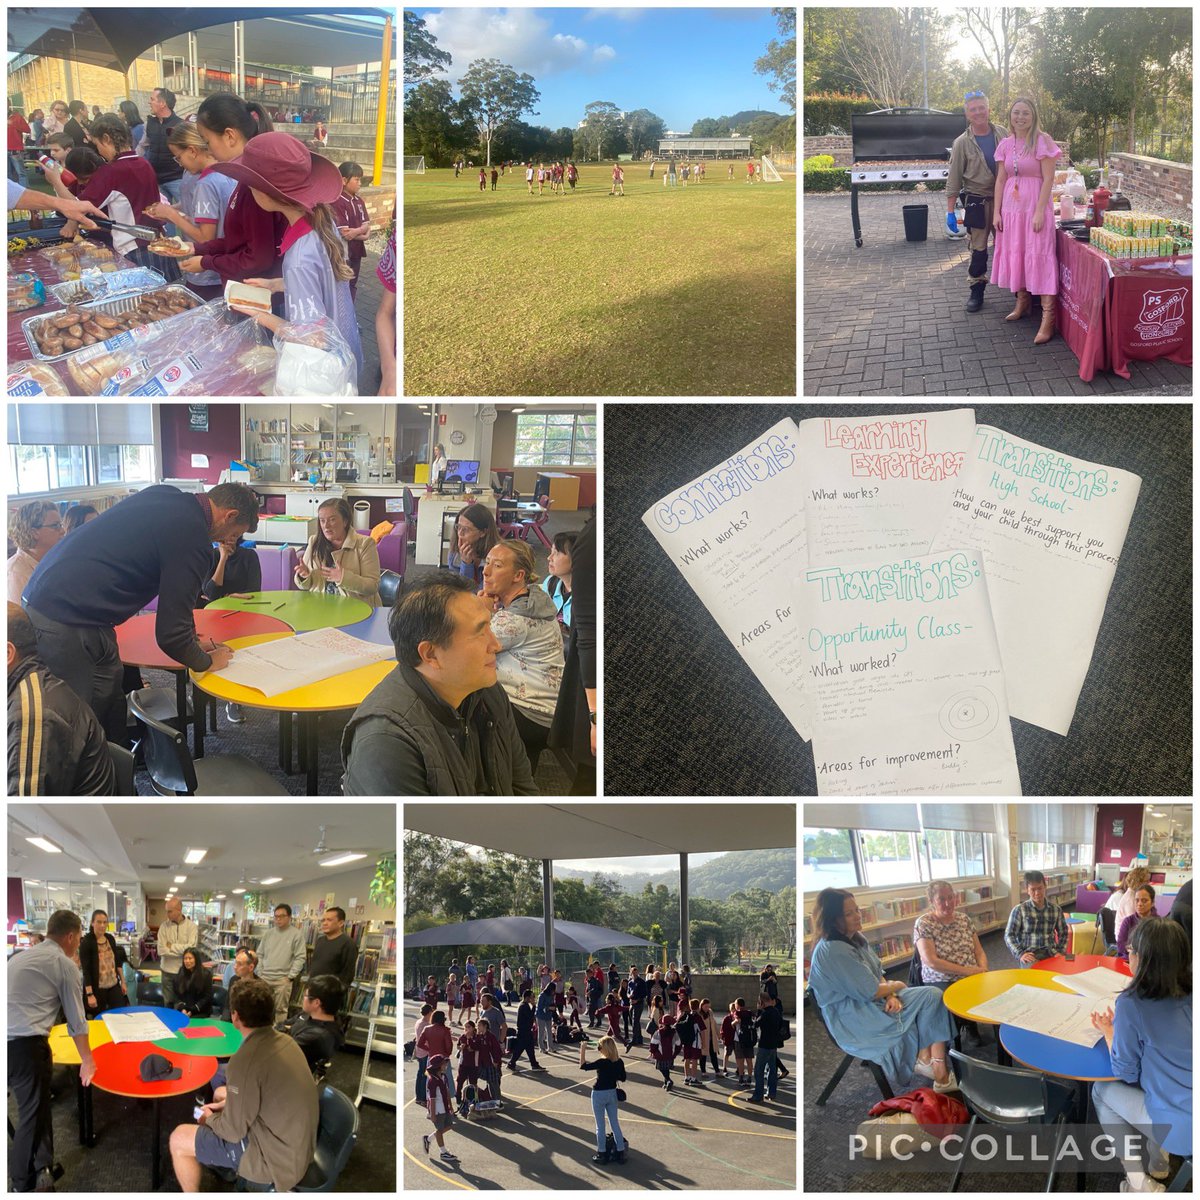 Evaluating strengths and opportunities for growth with regards to student and family connections, learning experiences and school transitions at our OC parent focus group and welcome BBQ. Great insights and a wonderful community event! #opportunityclass #HPGE #LoveWhereYouLearn